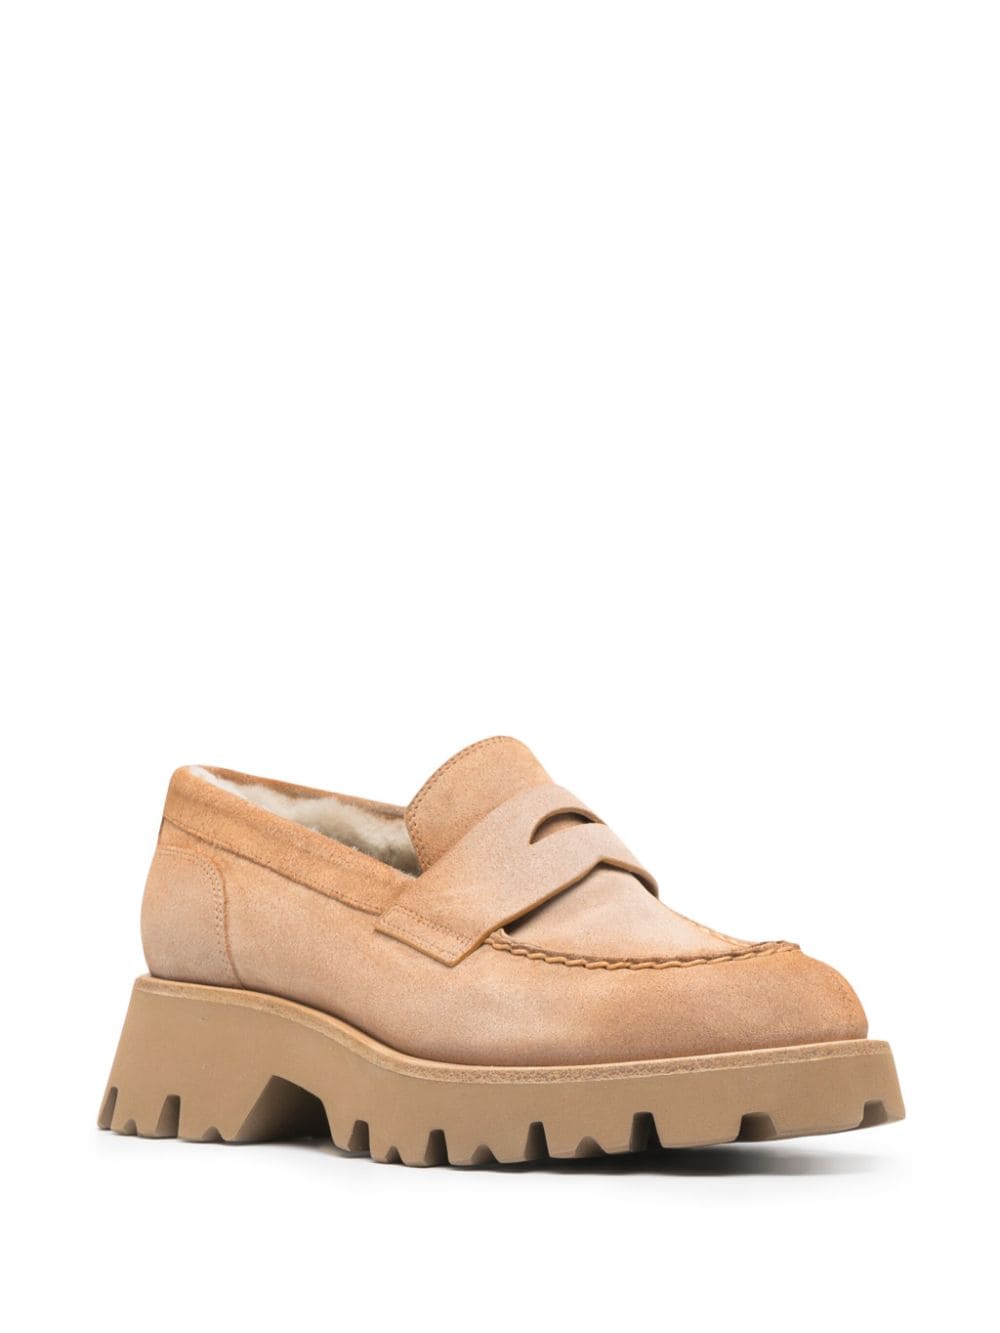 PENNY SLOT SUEDE LOAFERS